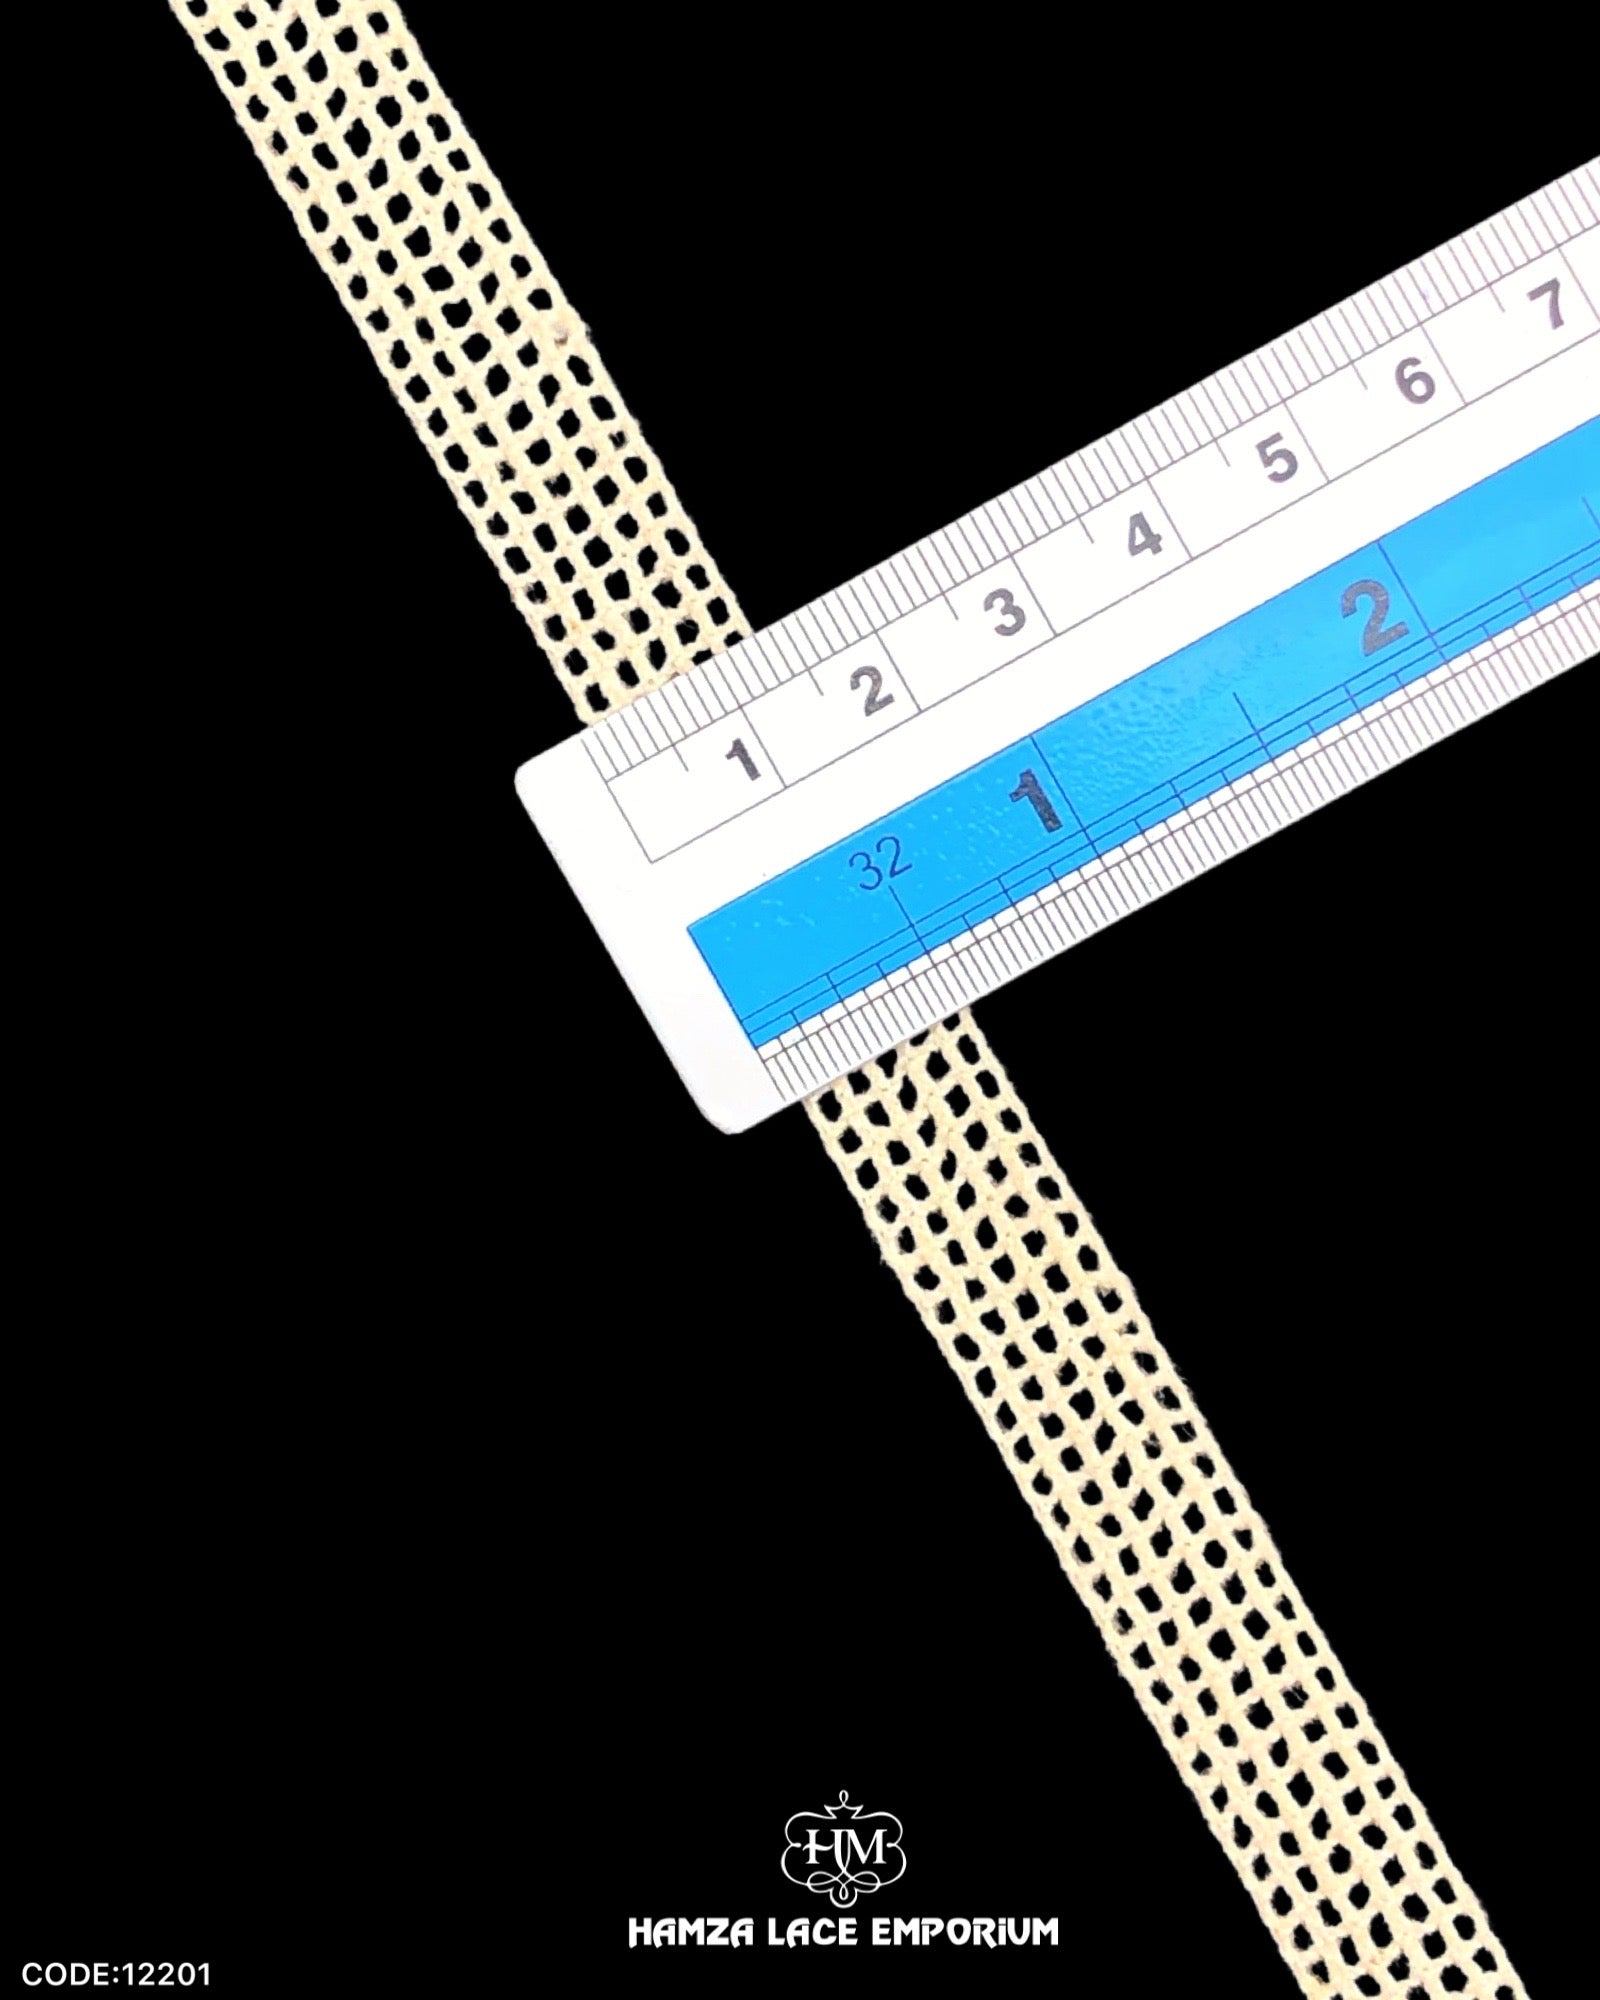 Size of the 'Center Filling Crochet Lace 12201' is shown with the help of a ruler as '0.5' inches